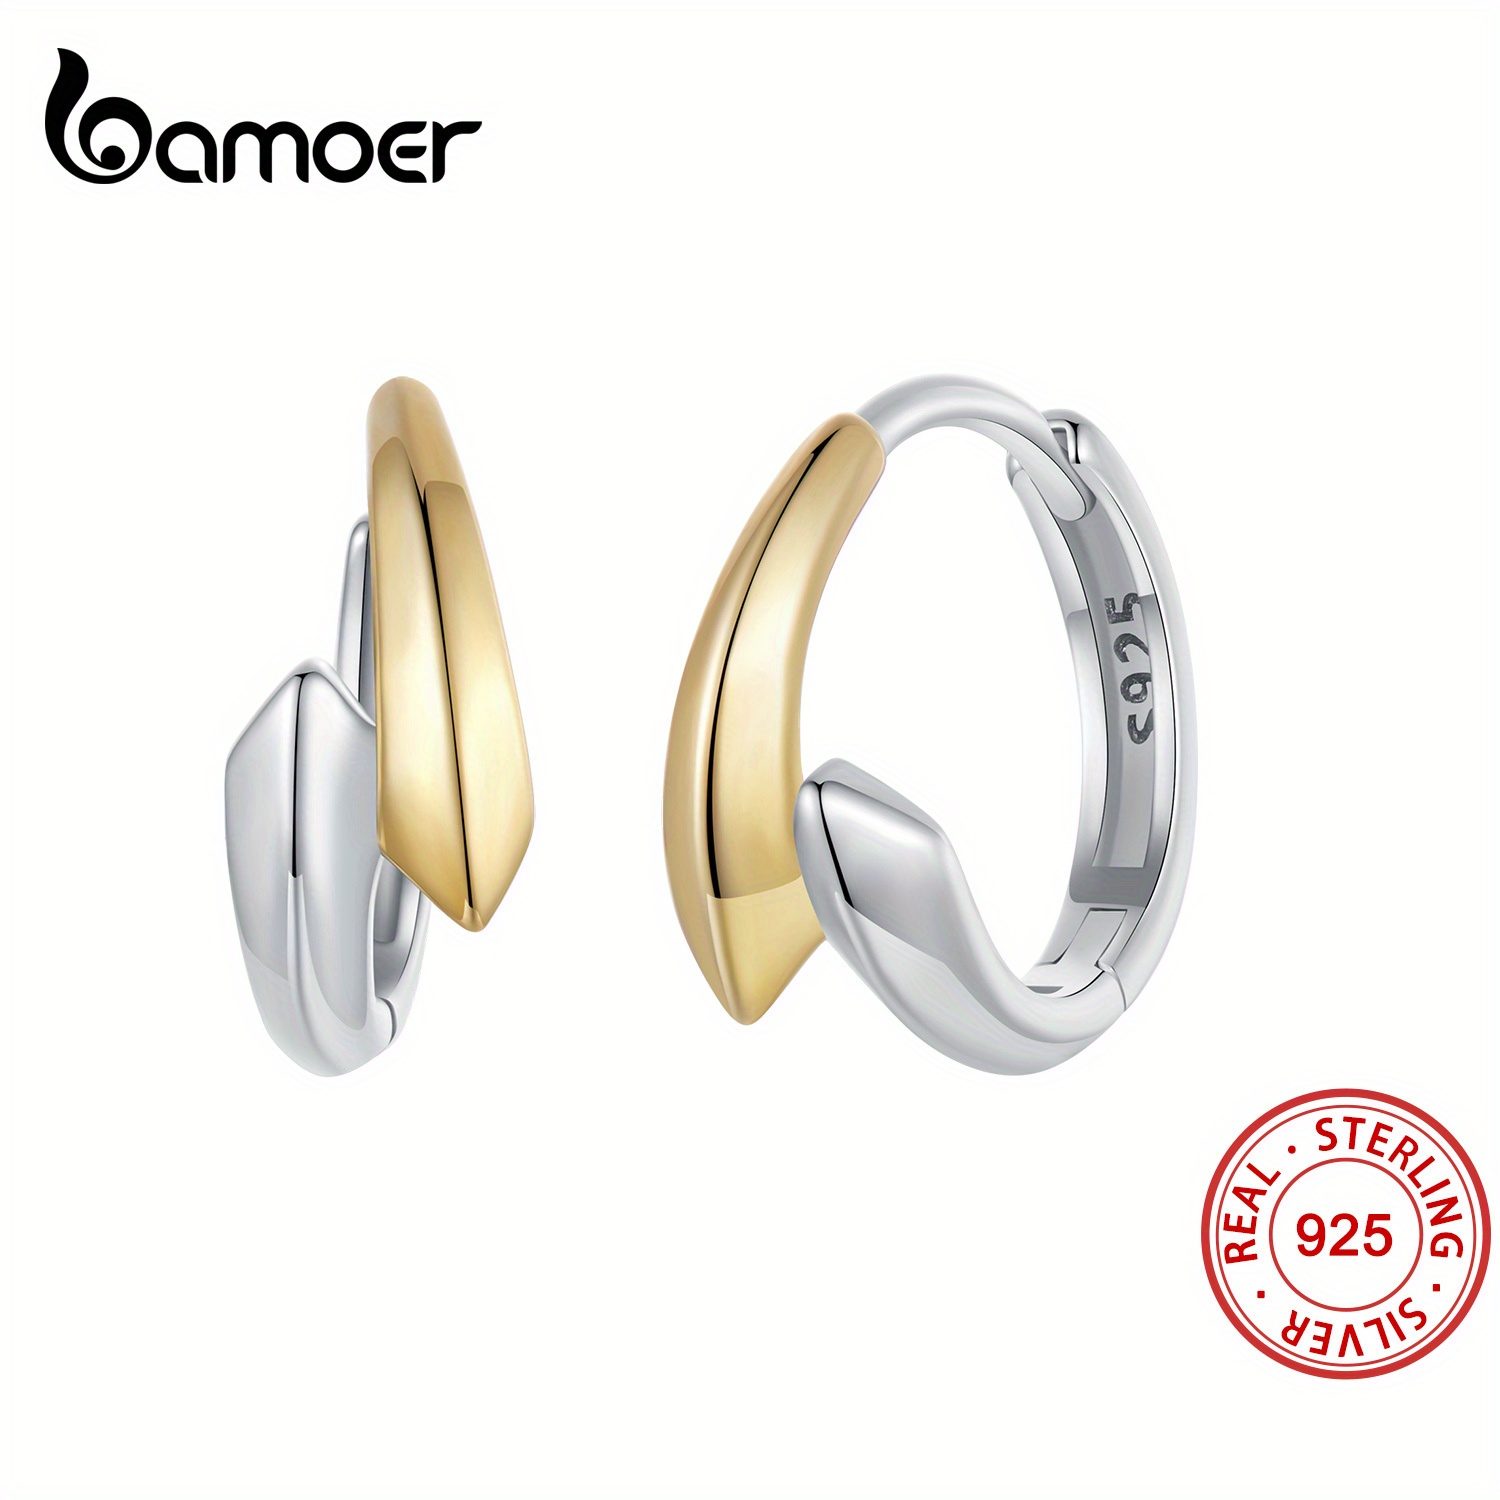 

1 Pair Dual-tone Elegant Simple Hoop Earrings, 925 Sterling Silver, Minimalist Style, With Gift Box, Perfect For Dinners And Weddings